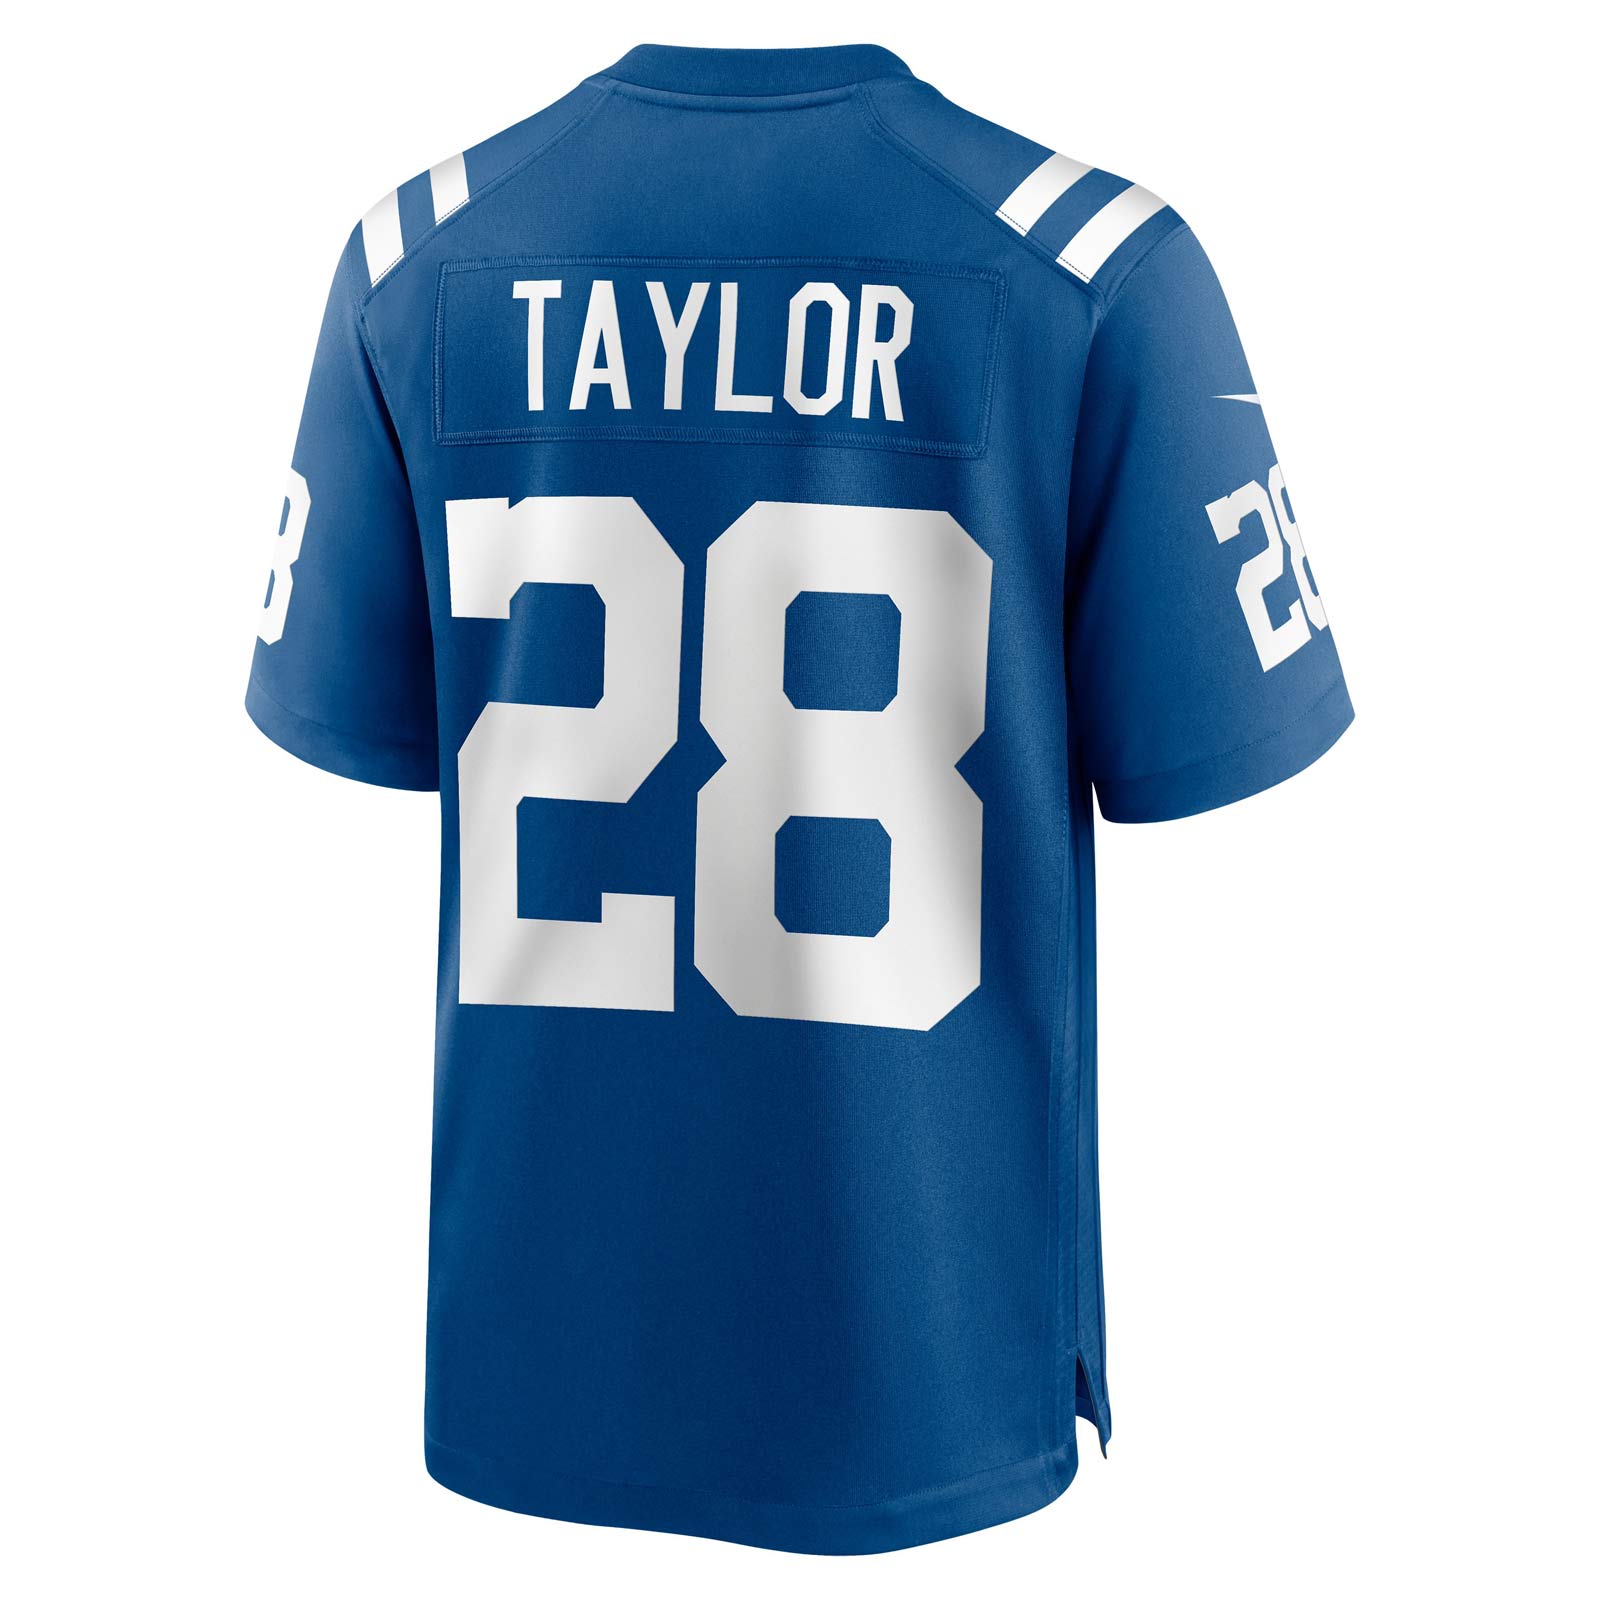 NIKE INDIANAPOLIS COLTS TAYLOR 28 HOME JERSEY